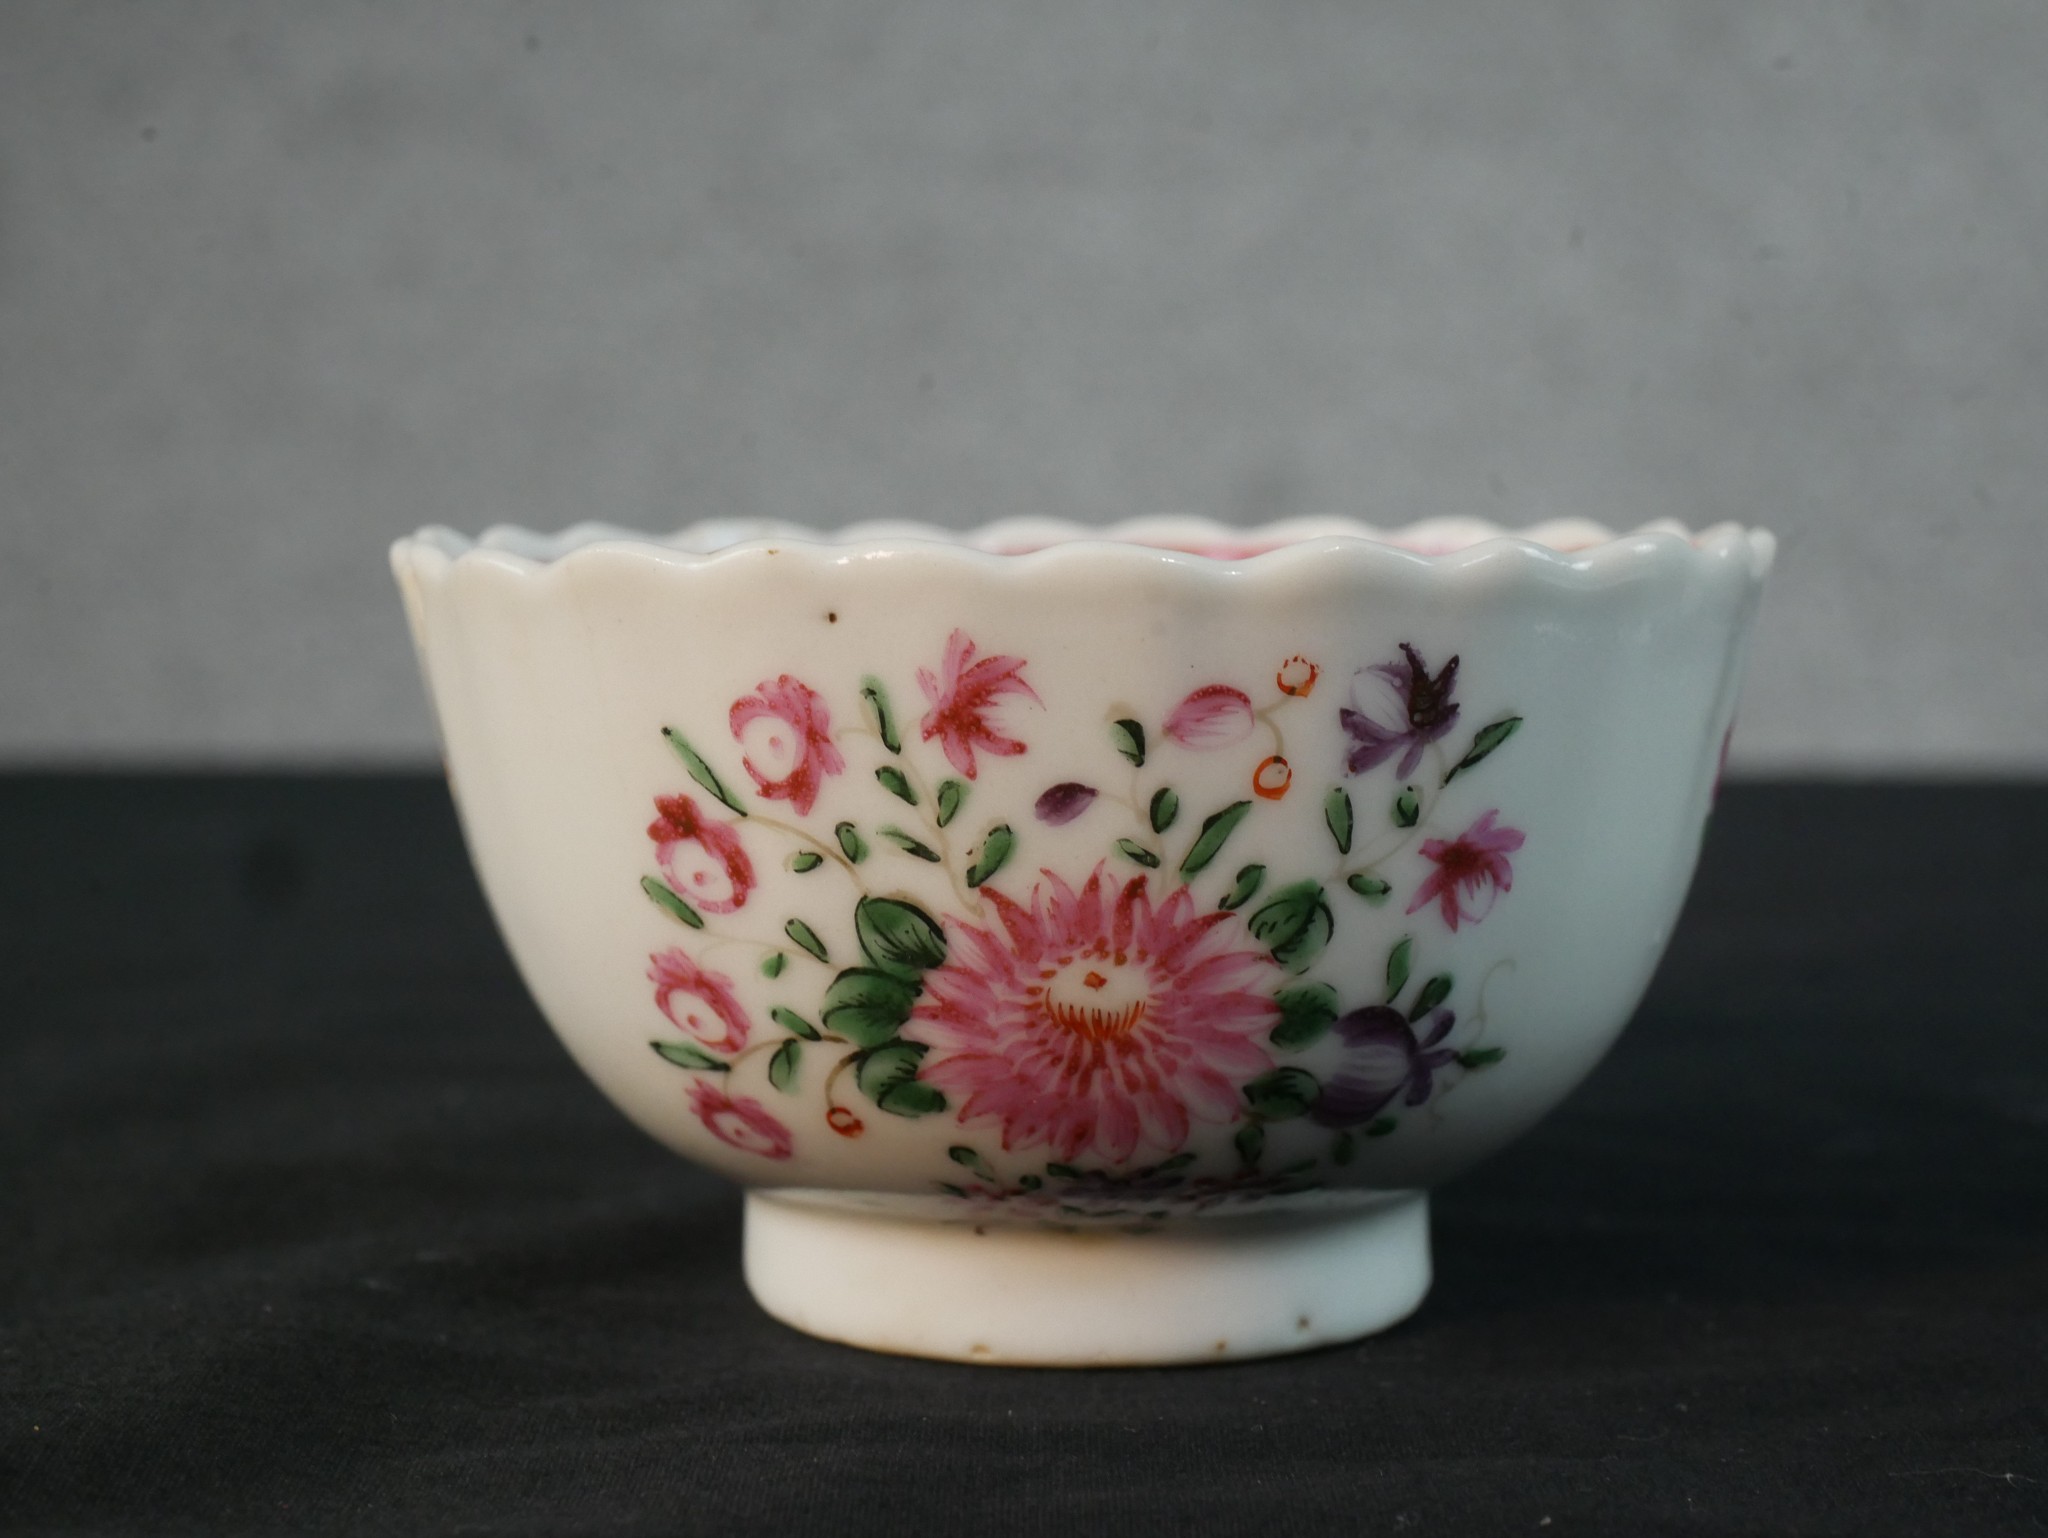 An 18th century Chinese export Famille Rose plate with floral design along with a matching lotus - Image 6 of 8